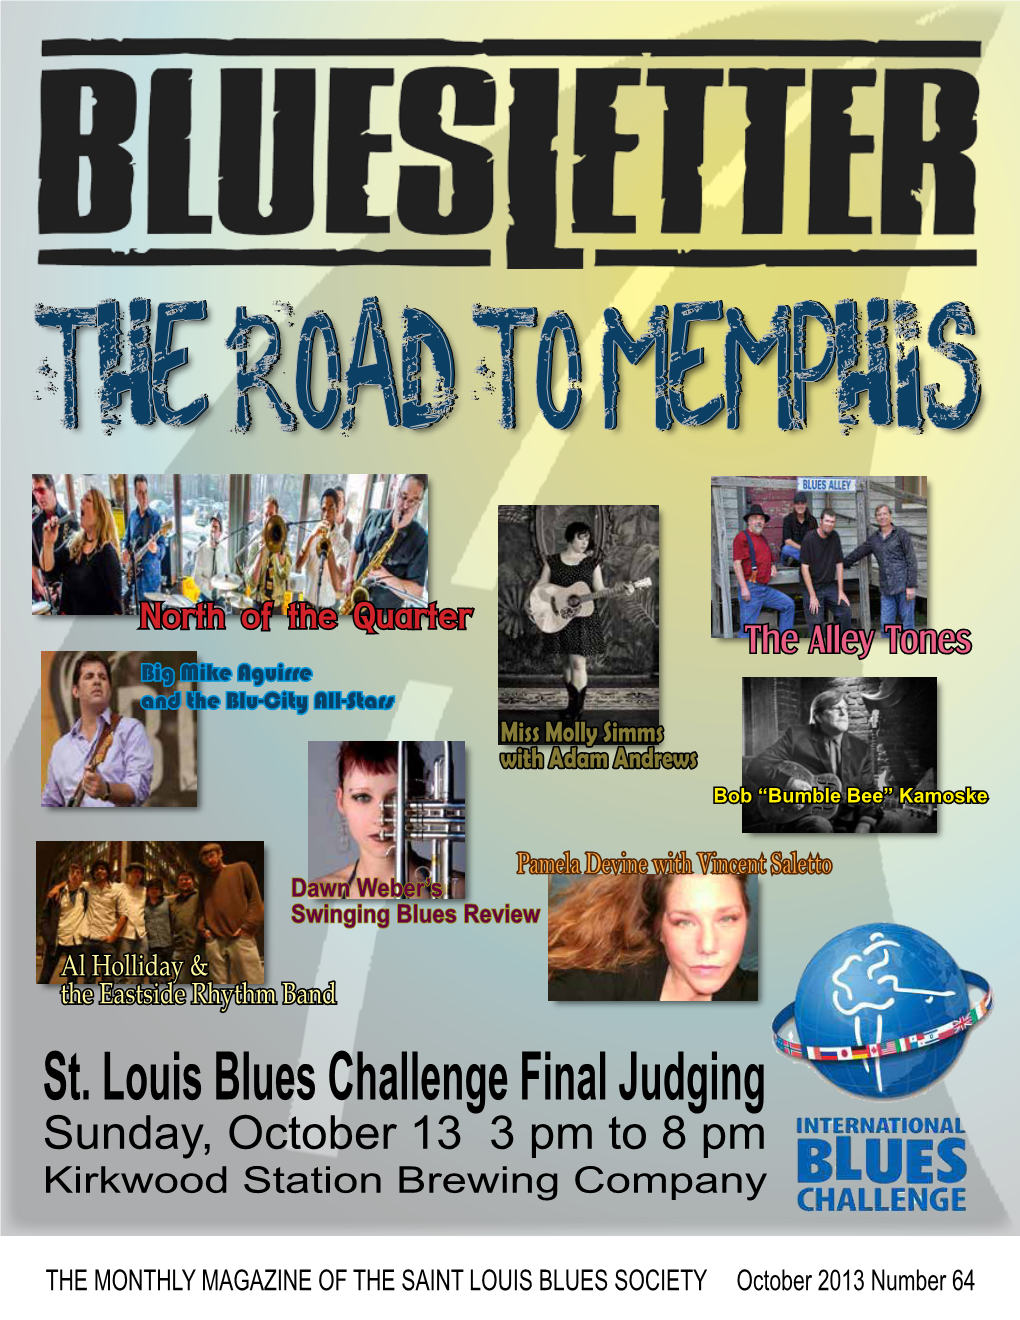 St. Louis Blues Challenge Final Judging Sunday, October 13 3 Pm to 8 Pm Kirkwood Station Brewing Company